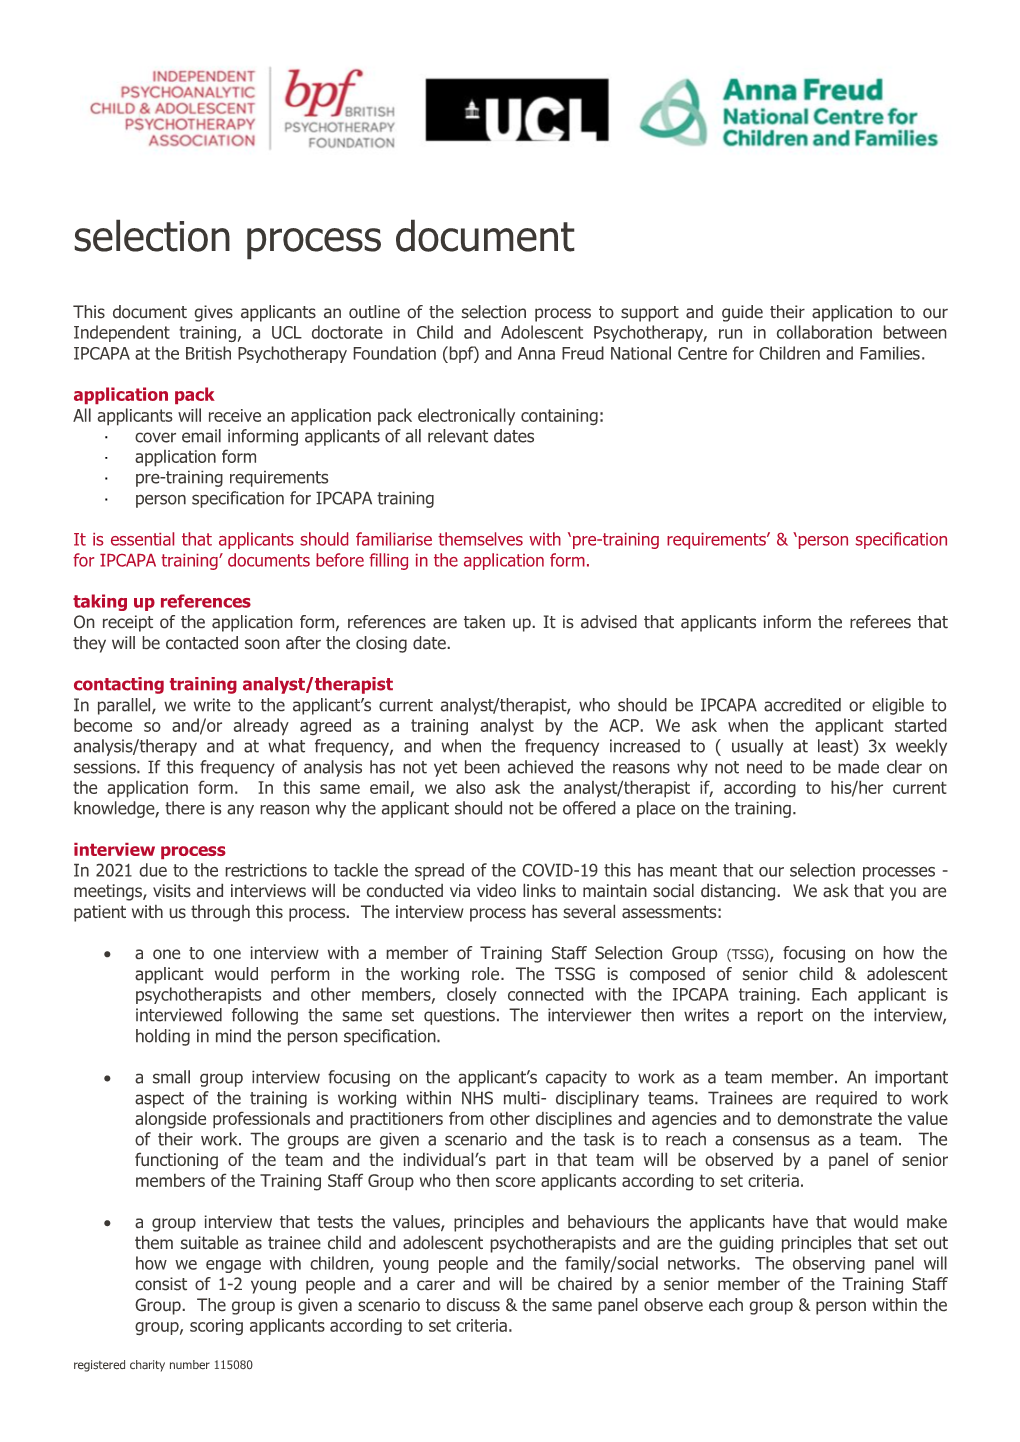 Selection Process Document